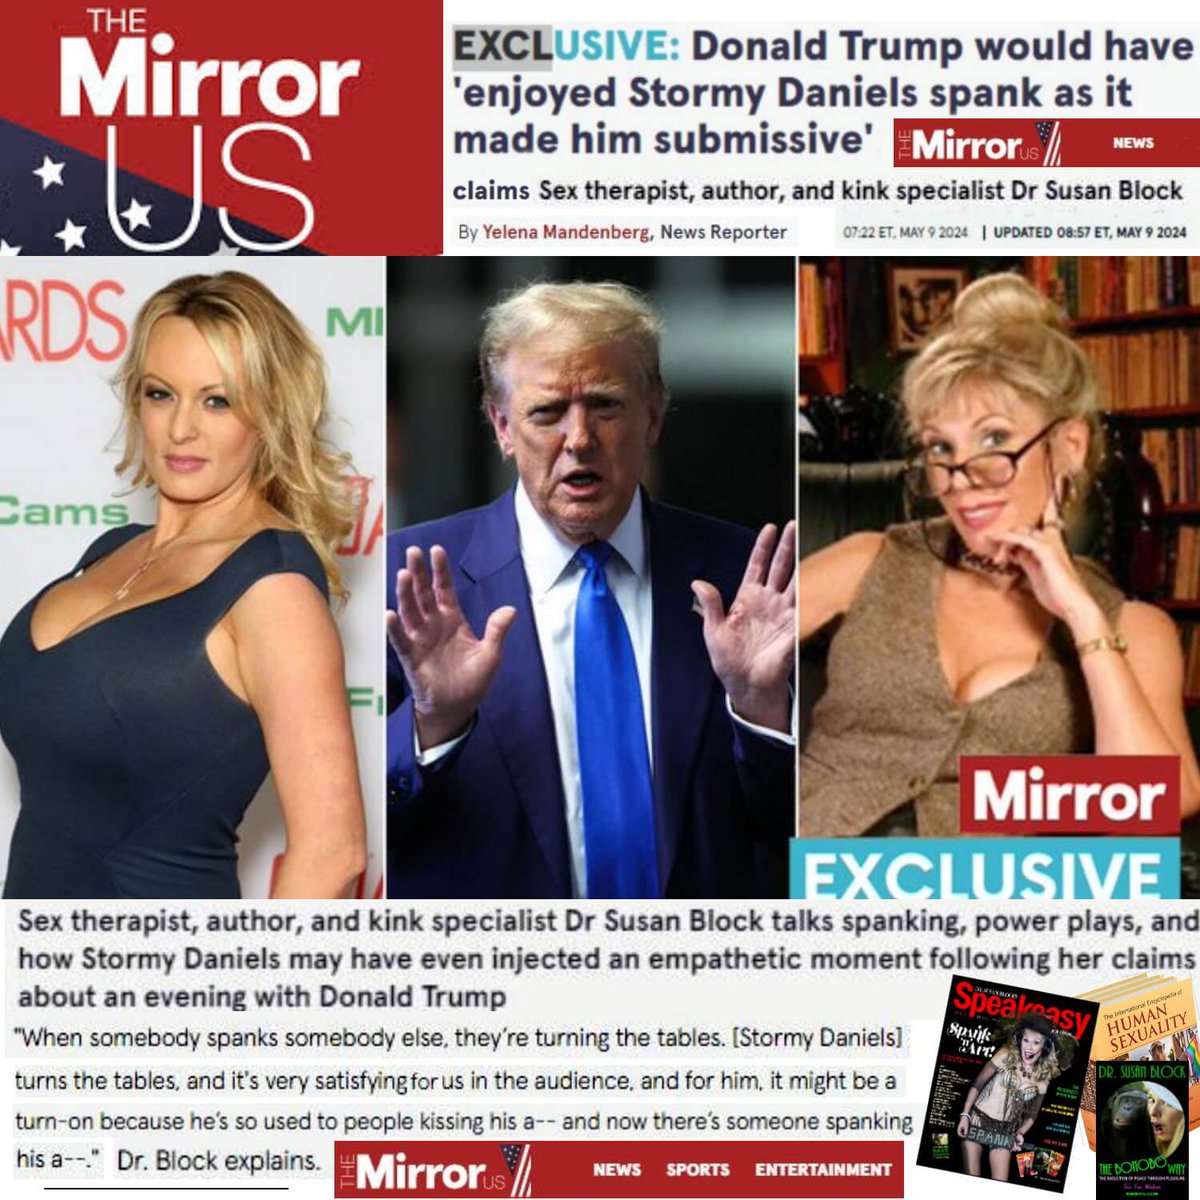 @MirrorUSNews 'Exclusive' Interview with Me in #TheMirror on How @StormyDaniels SPANKING tRump Turned the Tables on their Power Imbalance & Made Him Less Obnoxious... for a few minutes😘by Yelena Mandenberg: themirror.com/news/us-news/d… 🪩 PR: drsusanblock.com/stormy-mirror 🍄 #GoBonobos 4 #StormyDaniels!